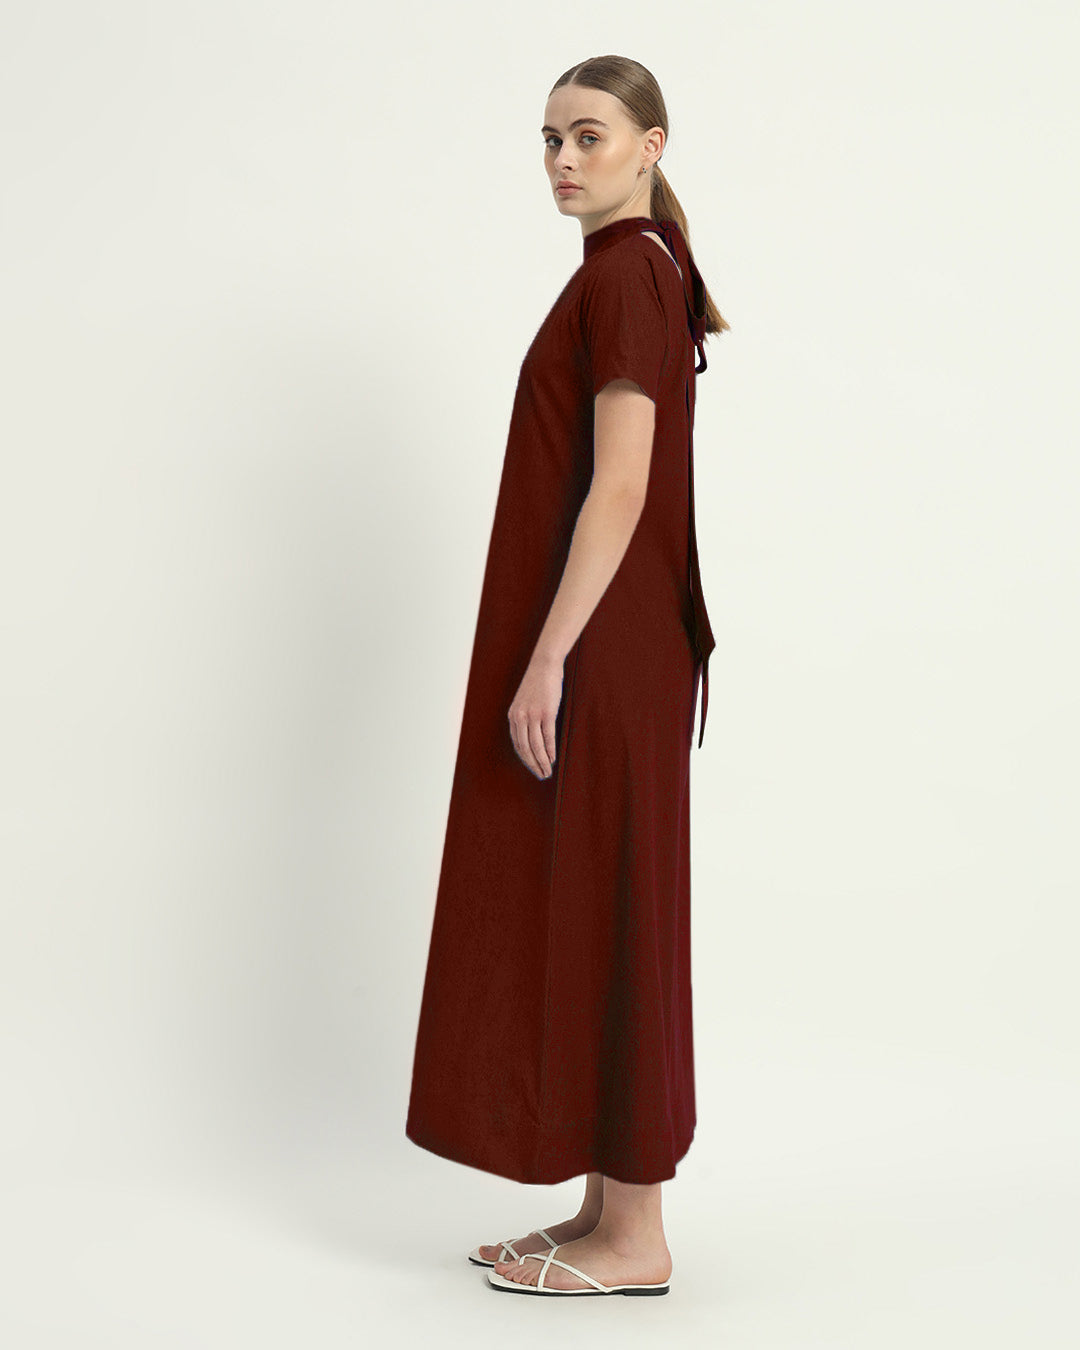 The Hermon Rouge Cotton Dress